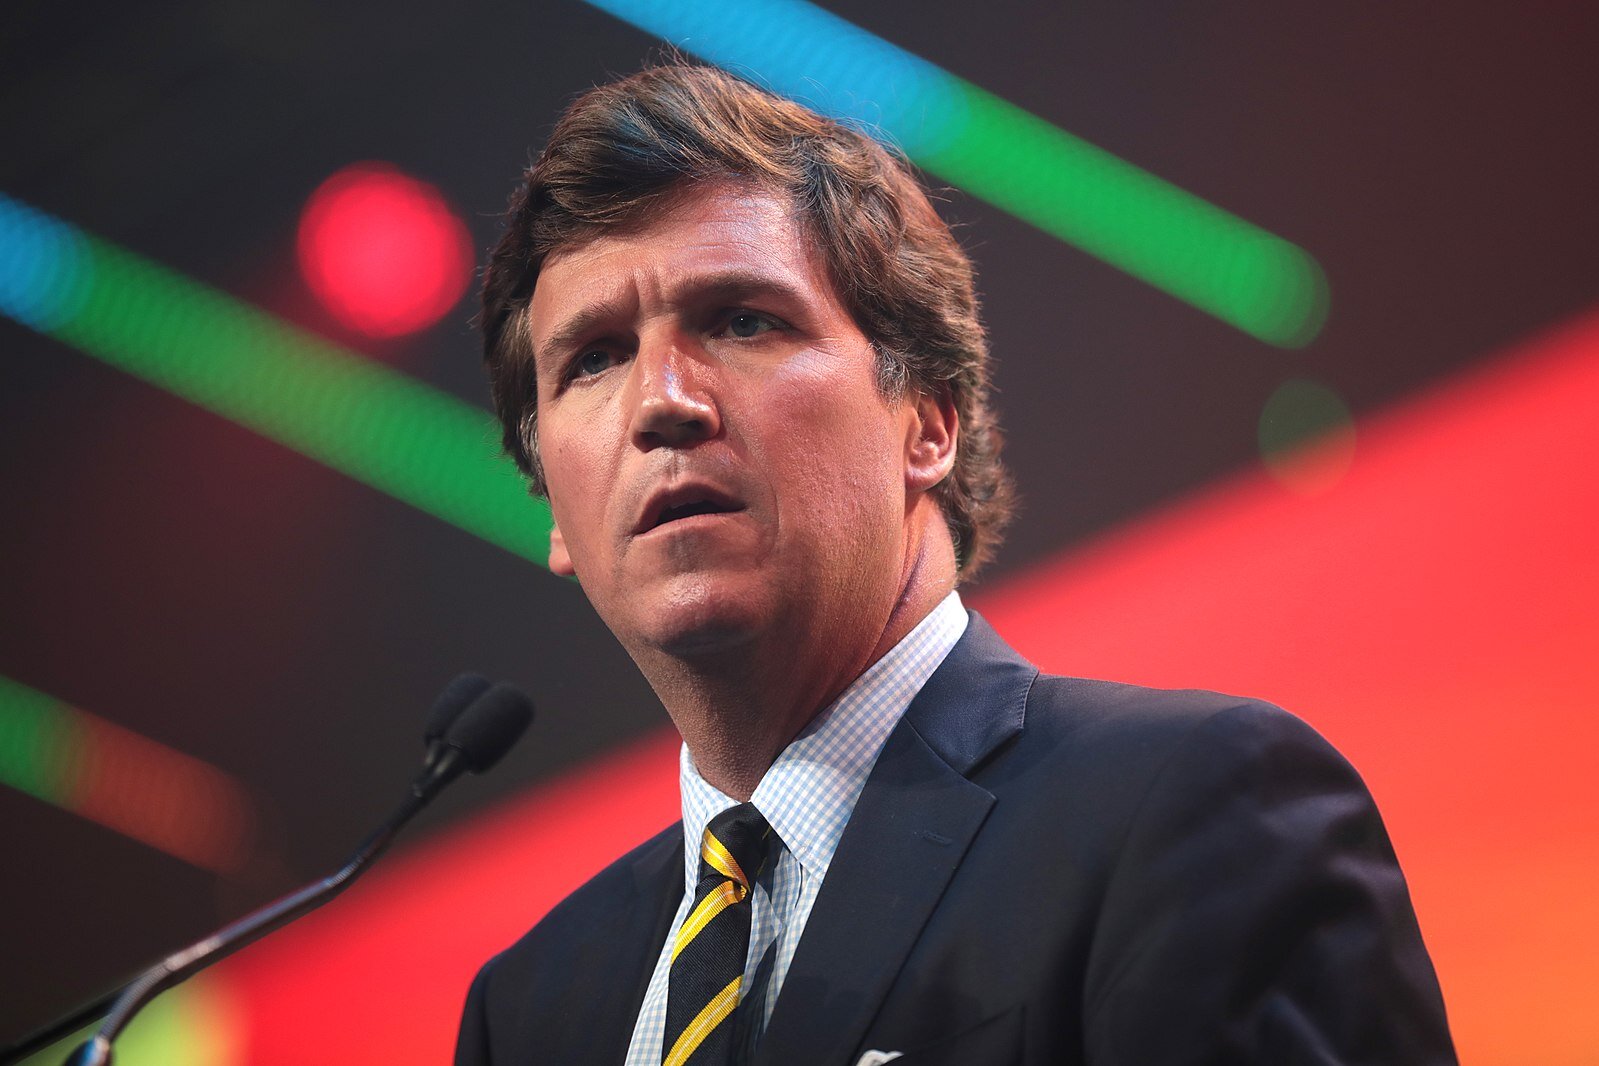 December 19th, 2020 – Tucker Carlson speaking with attendees at the 2020 Student Action Summit hosted by Turning Point USA at the Palm Beach County Convention Center in West Palm Beach, Florida. (Photo by Gage Skidmore | Wikimedia Commons)